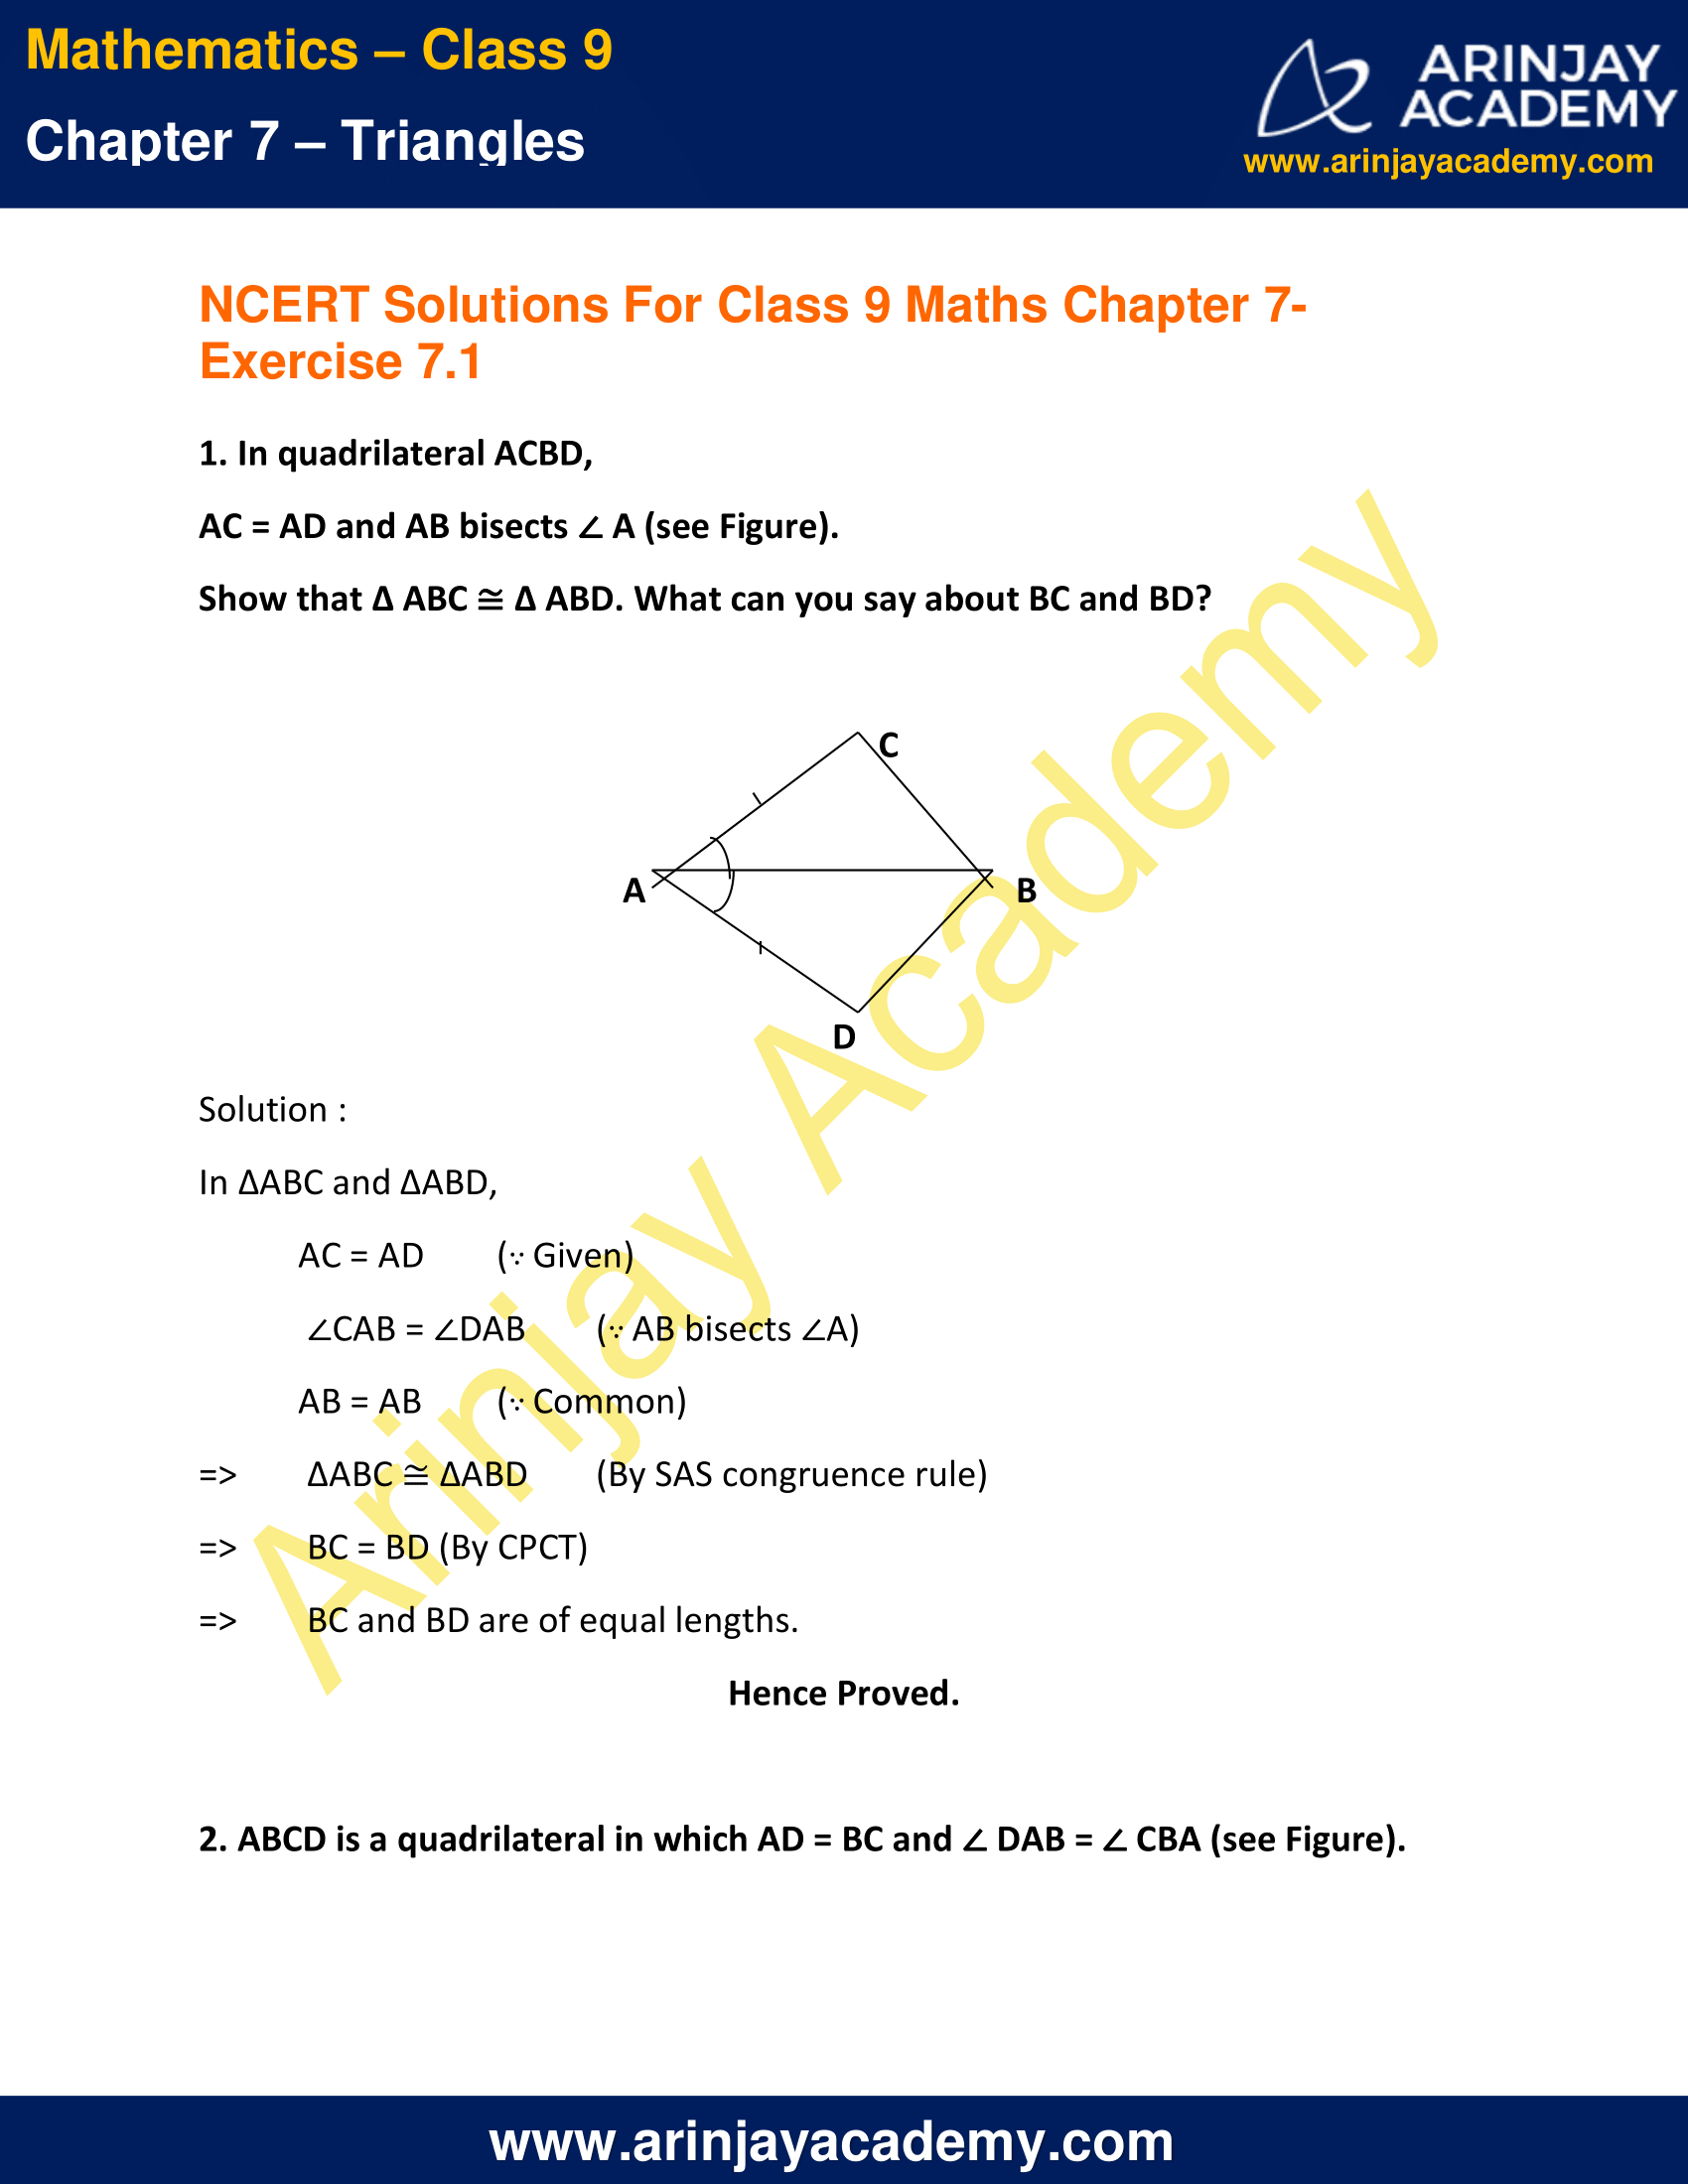 NCERT Solutions for Class 9 Maths Chapter 7 Exercise 7.1 image 1